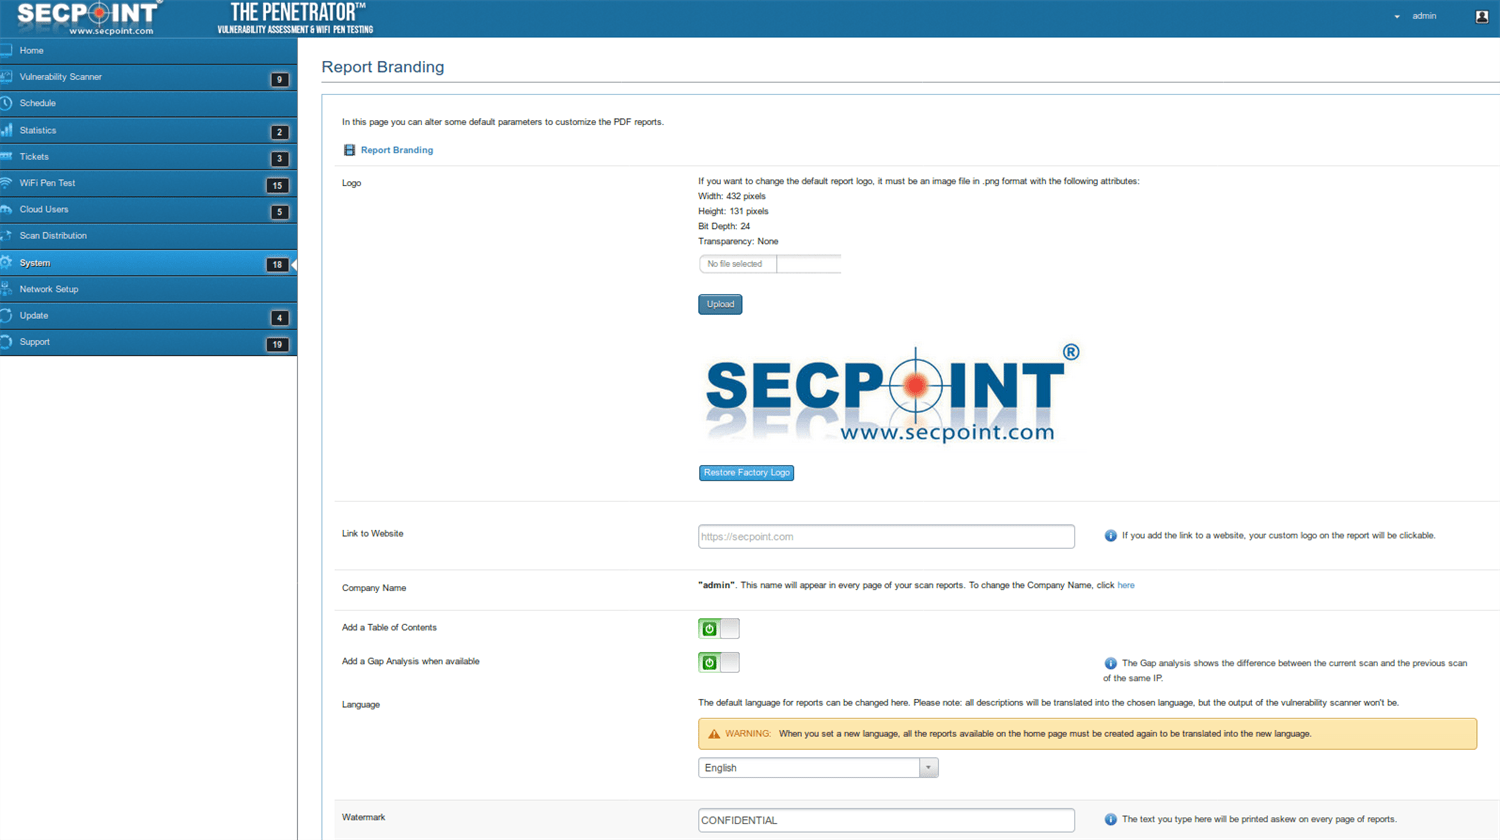 SecPoint Penetrator S9 - 8 IP Concurrent Scan License Vuln Scanning (1U Rack Mountable ) - SecPoint